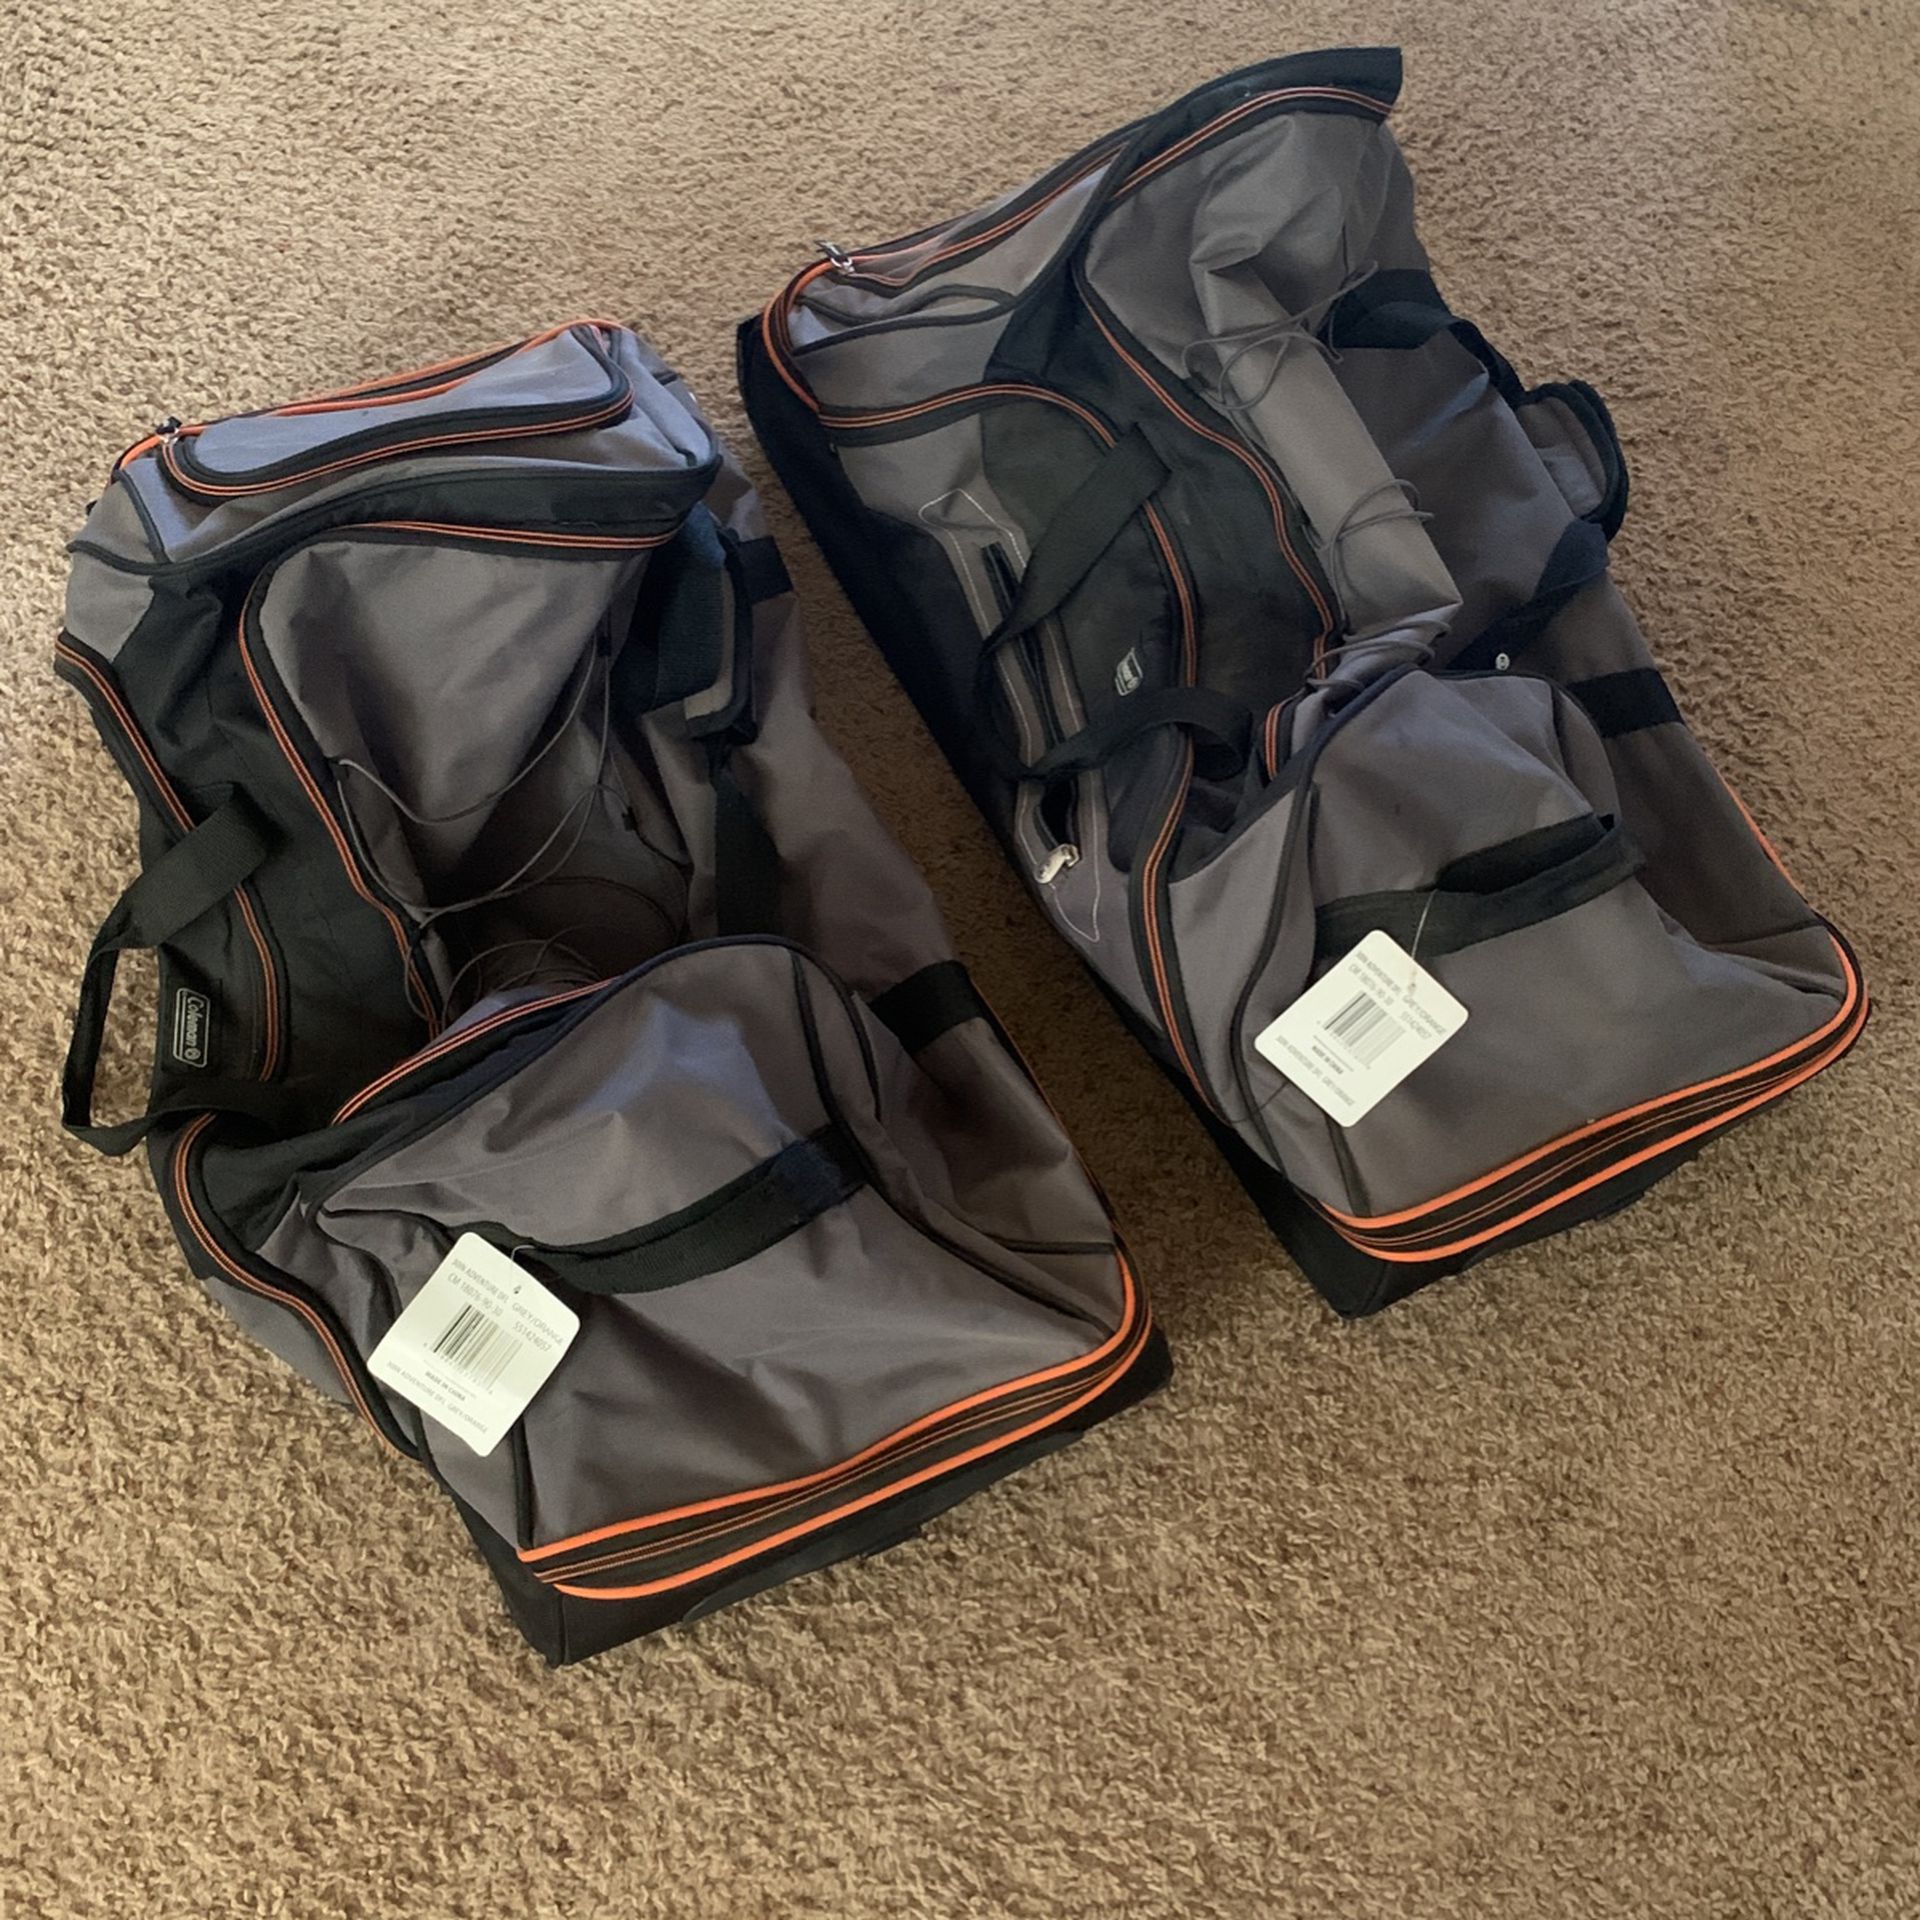 Two Large Rolling Coleman Duffle Bags